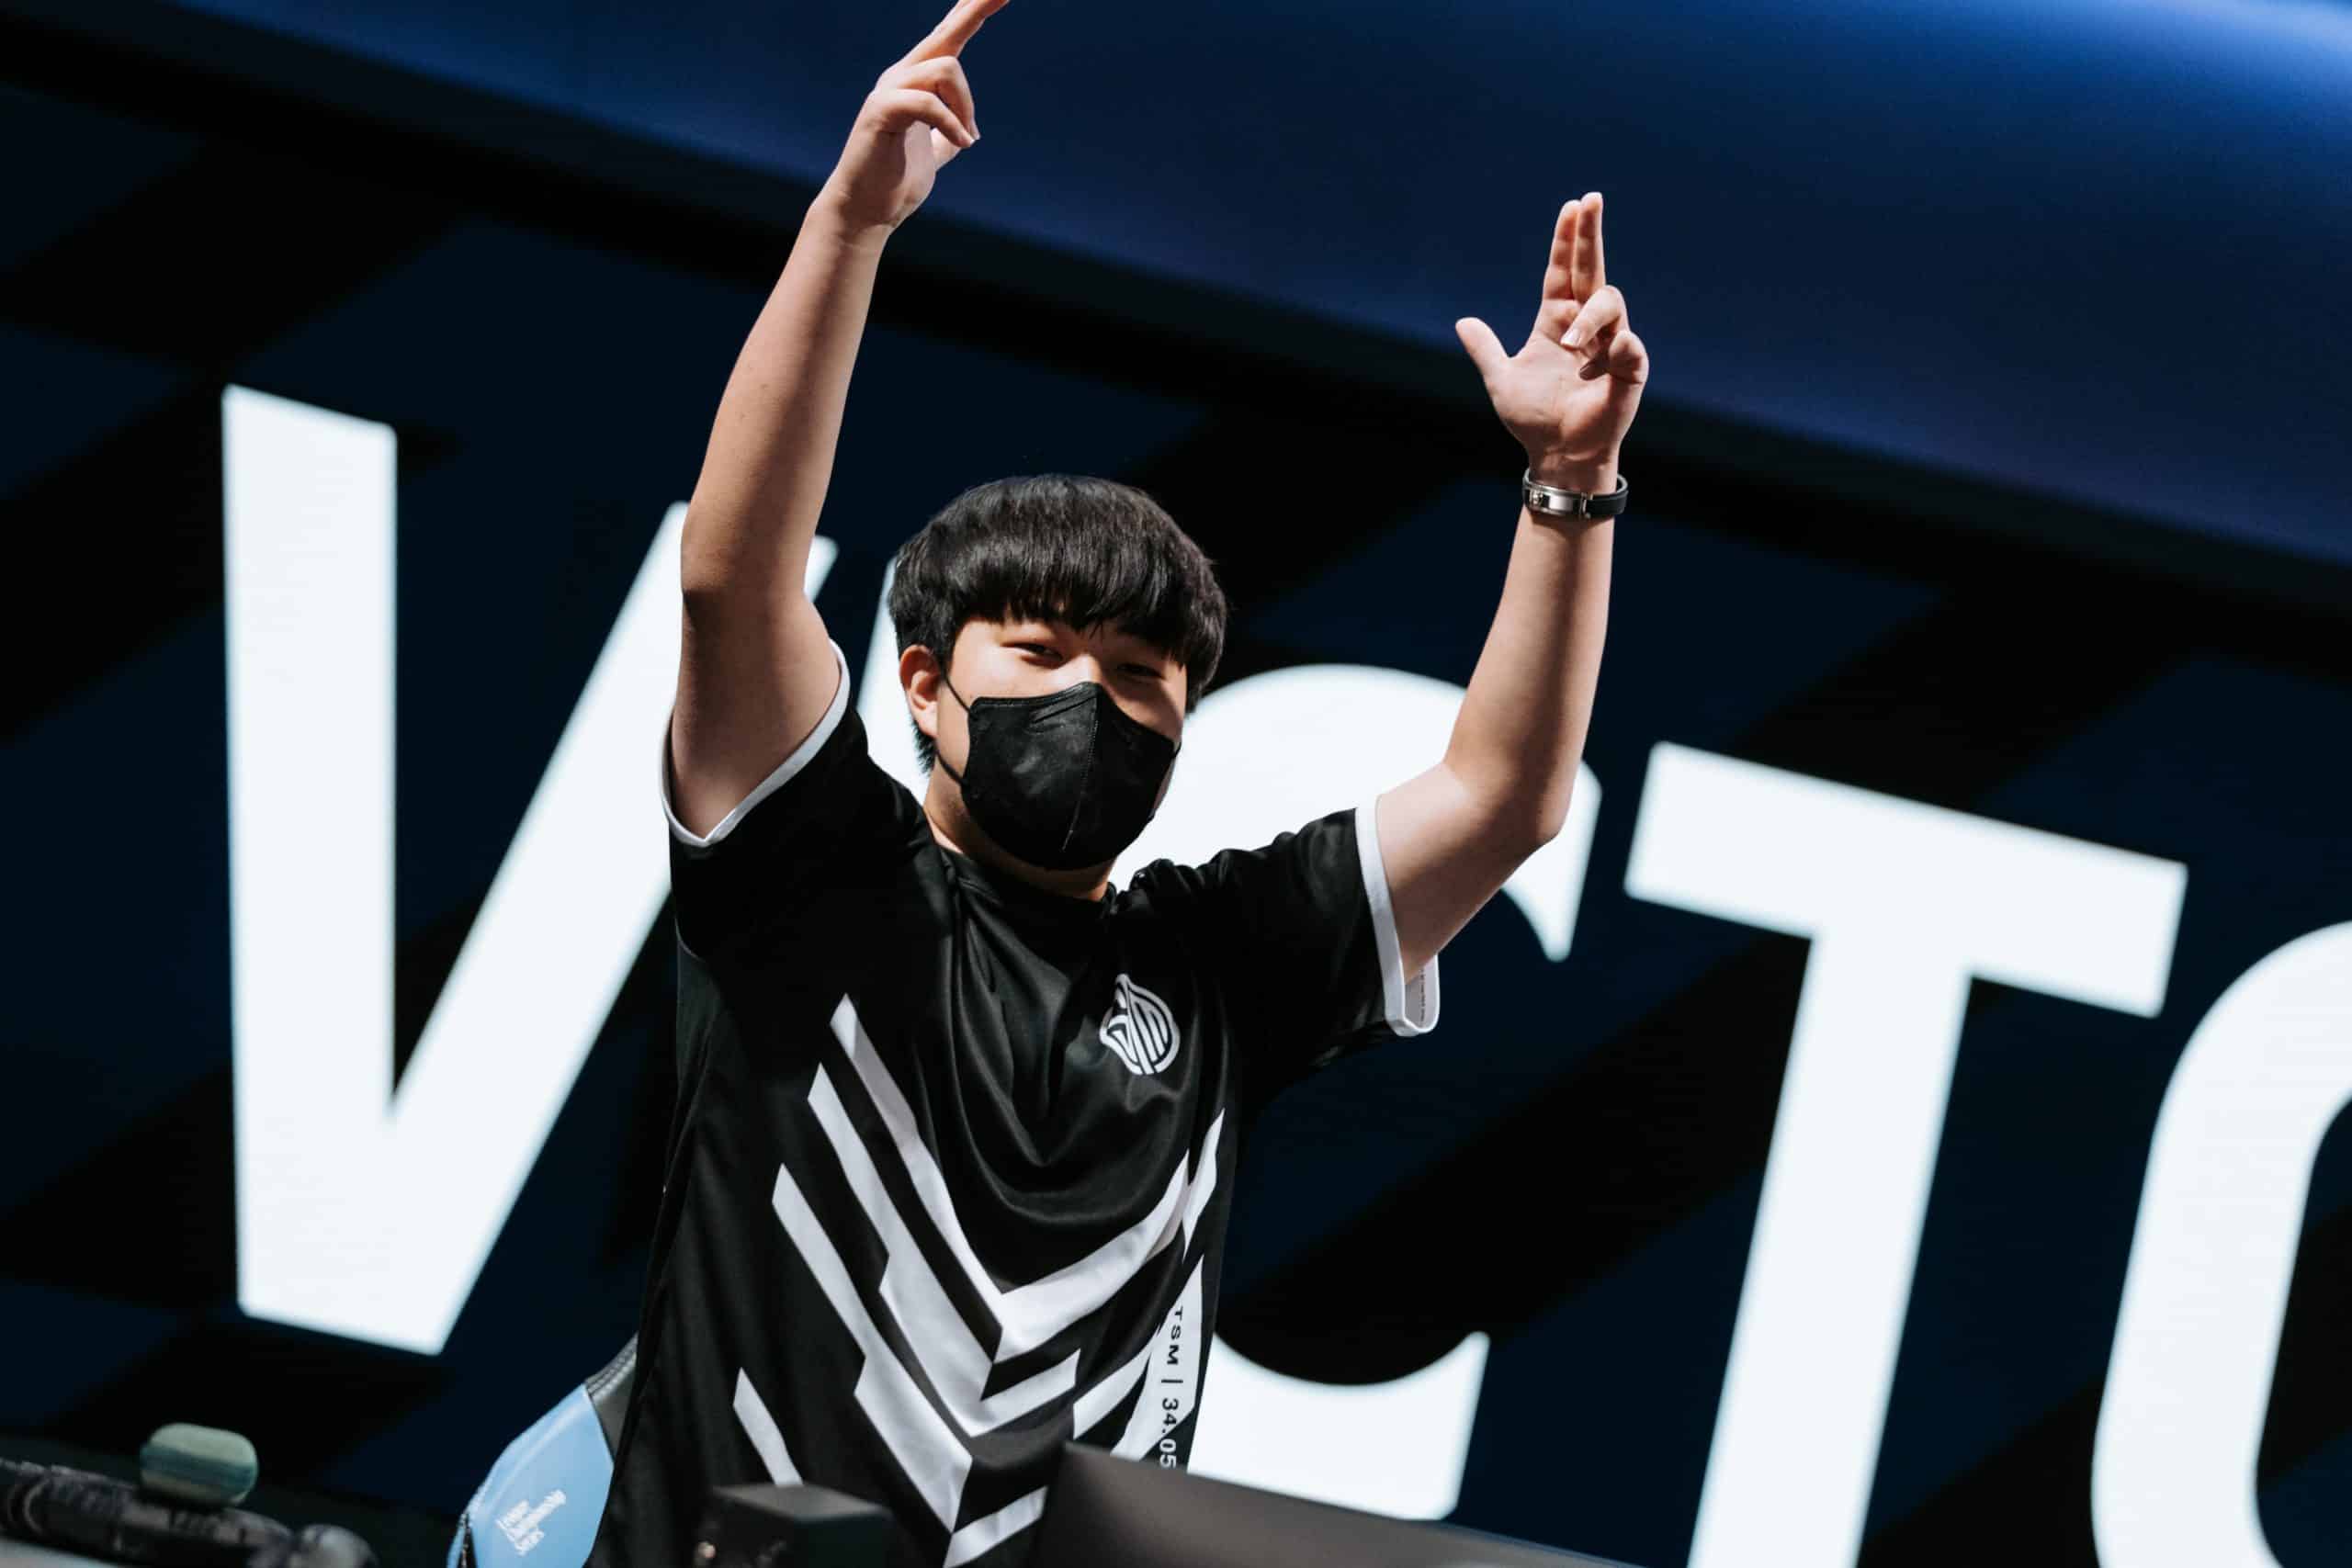 Star of a large LoL team ends his career in the middle of the LCS season - after the conversion, they almost only rely on newcomers